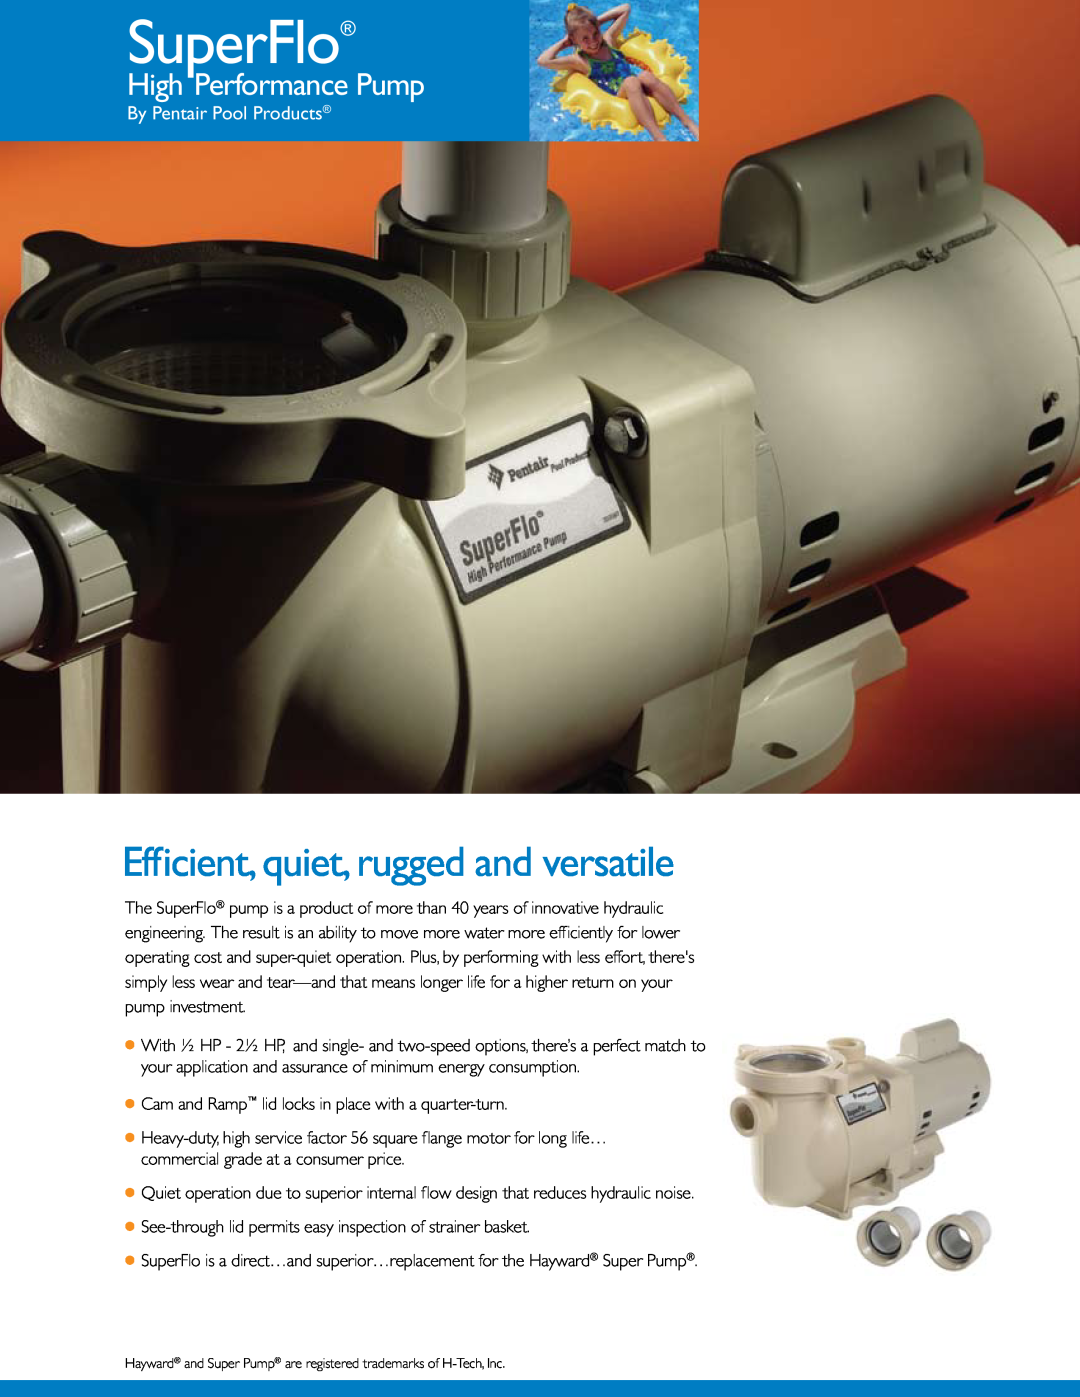 Pentair SuperFlo manual Efficient, quiet, rugged and versatile, High Performance Pump, By Pentair Pool Products 